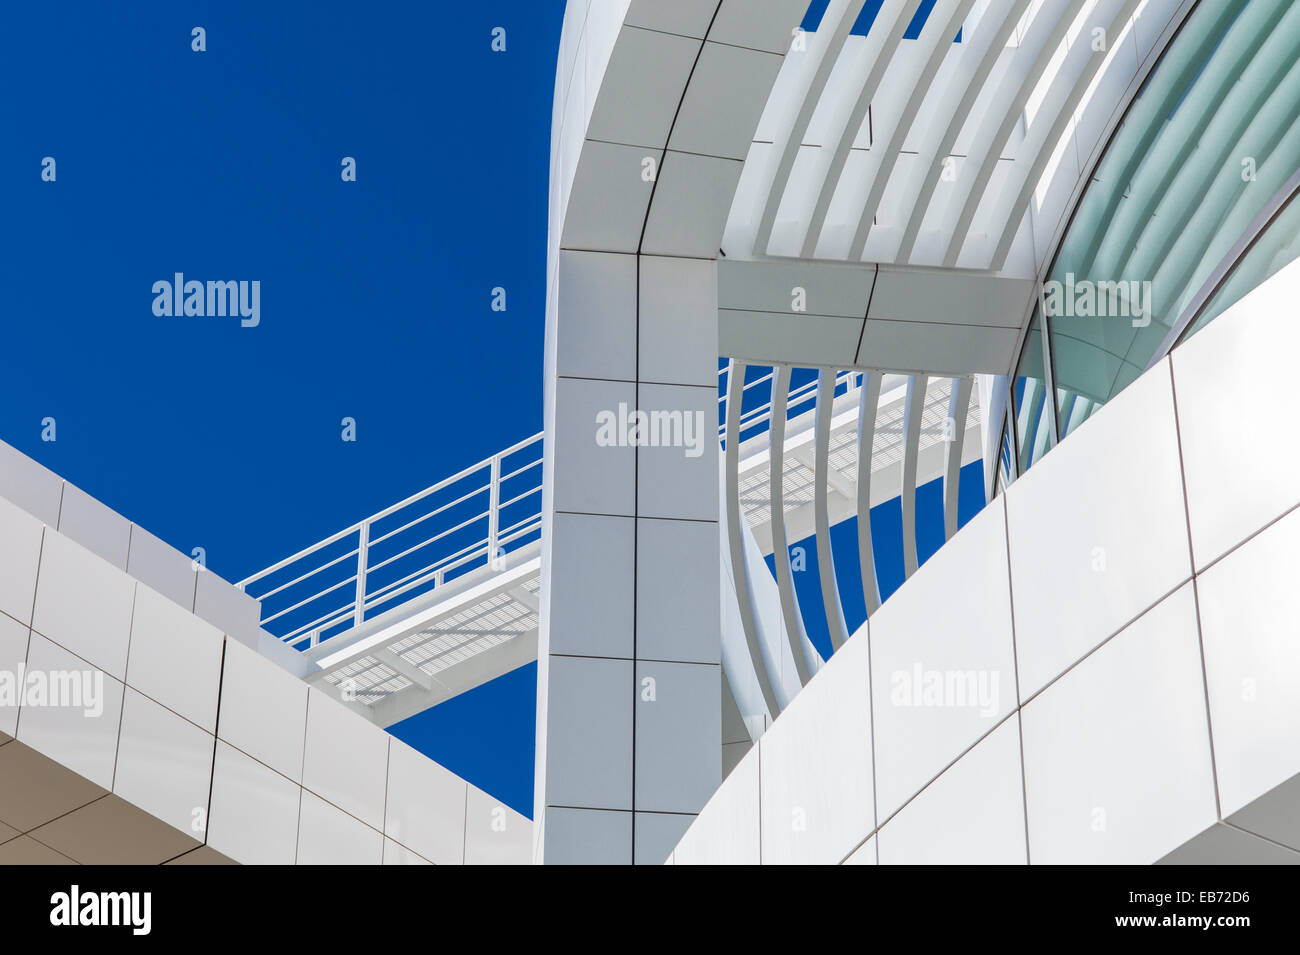 THE GETTY CENTER & MUSEUM LOS ANGELES CALIFORNIA Stock Photo